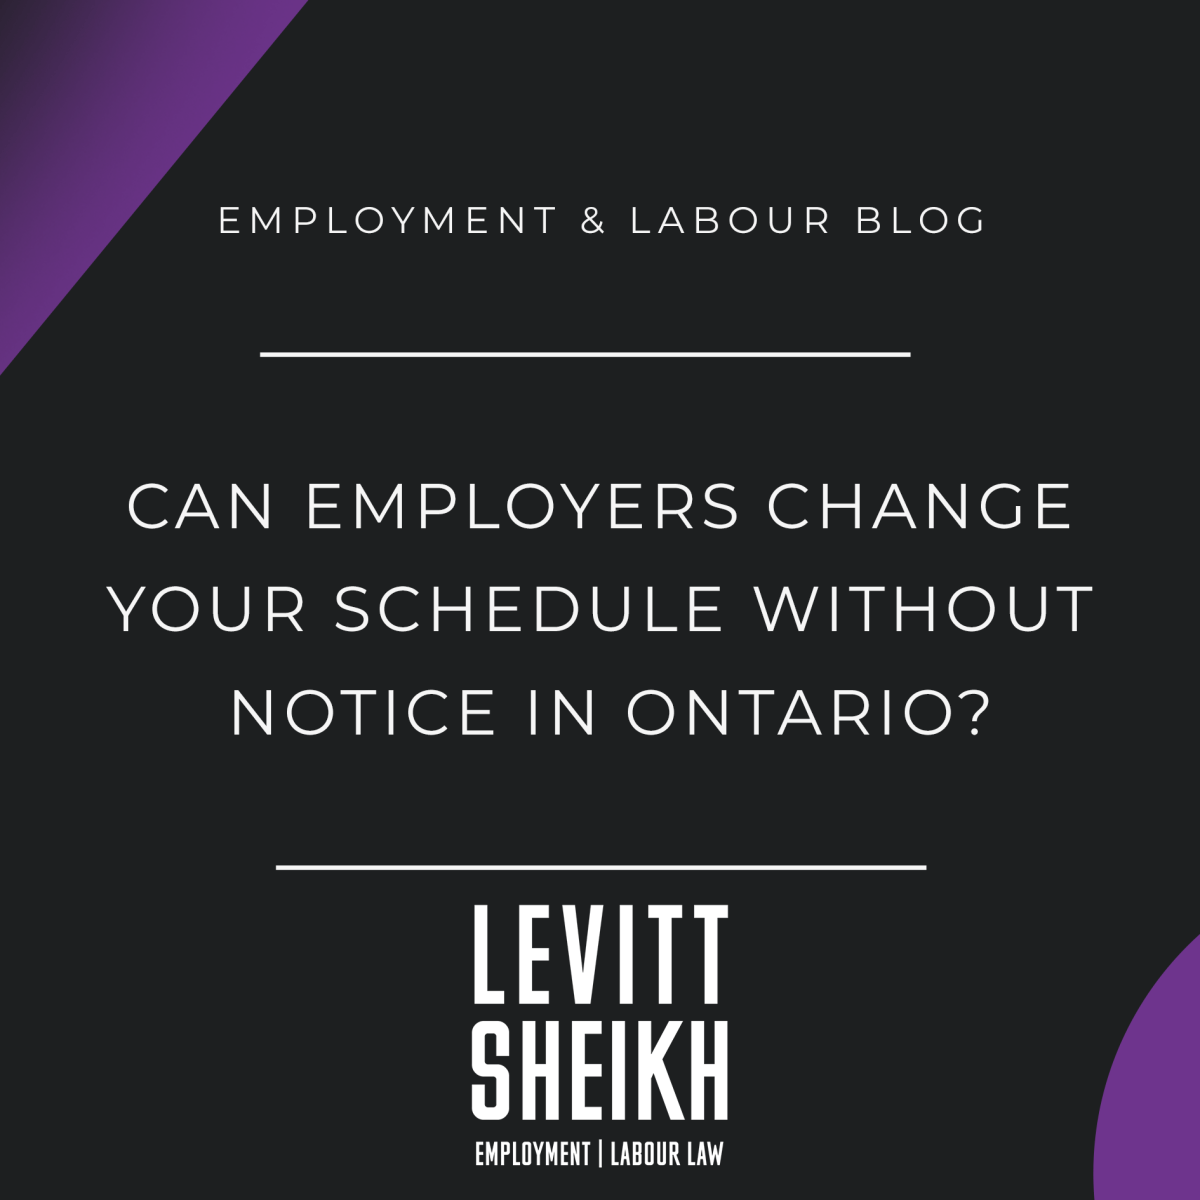 Can an employer change pay without notice